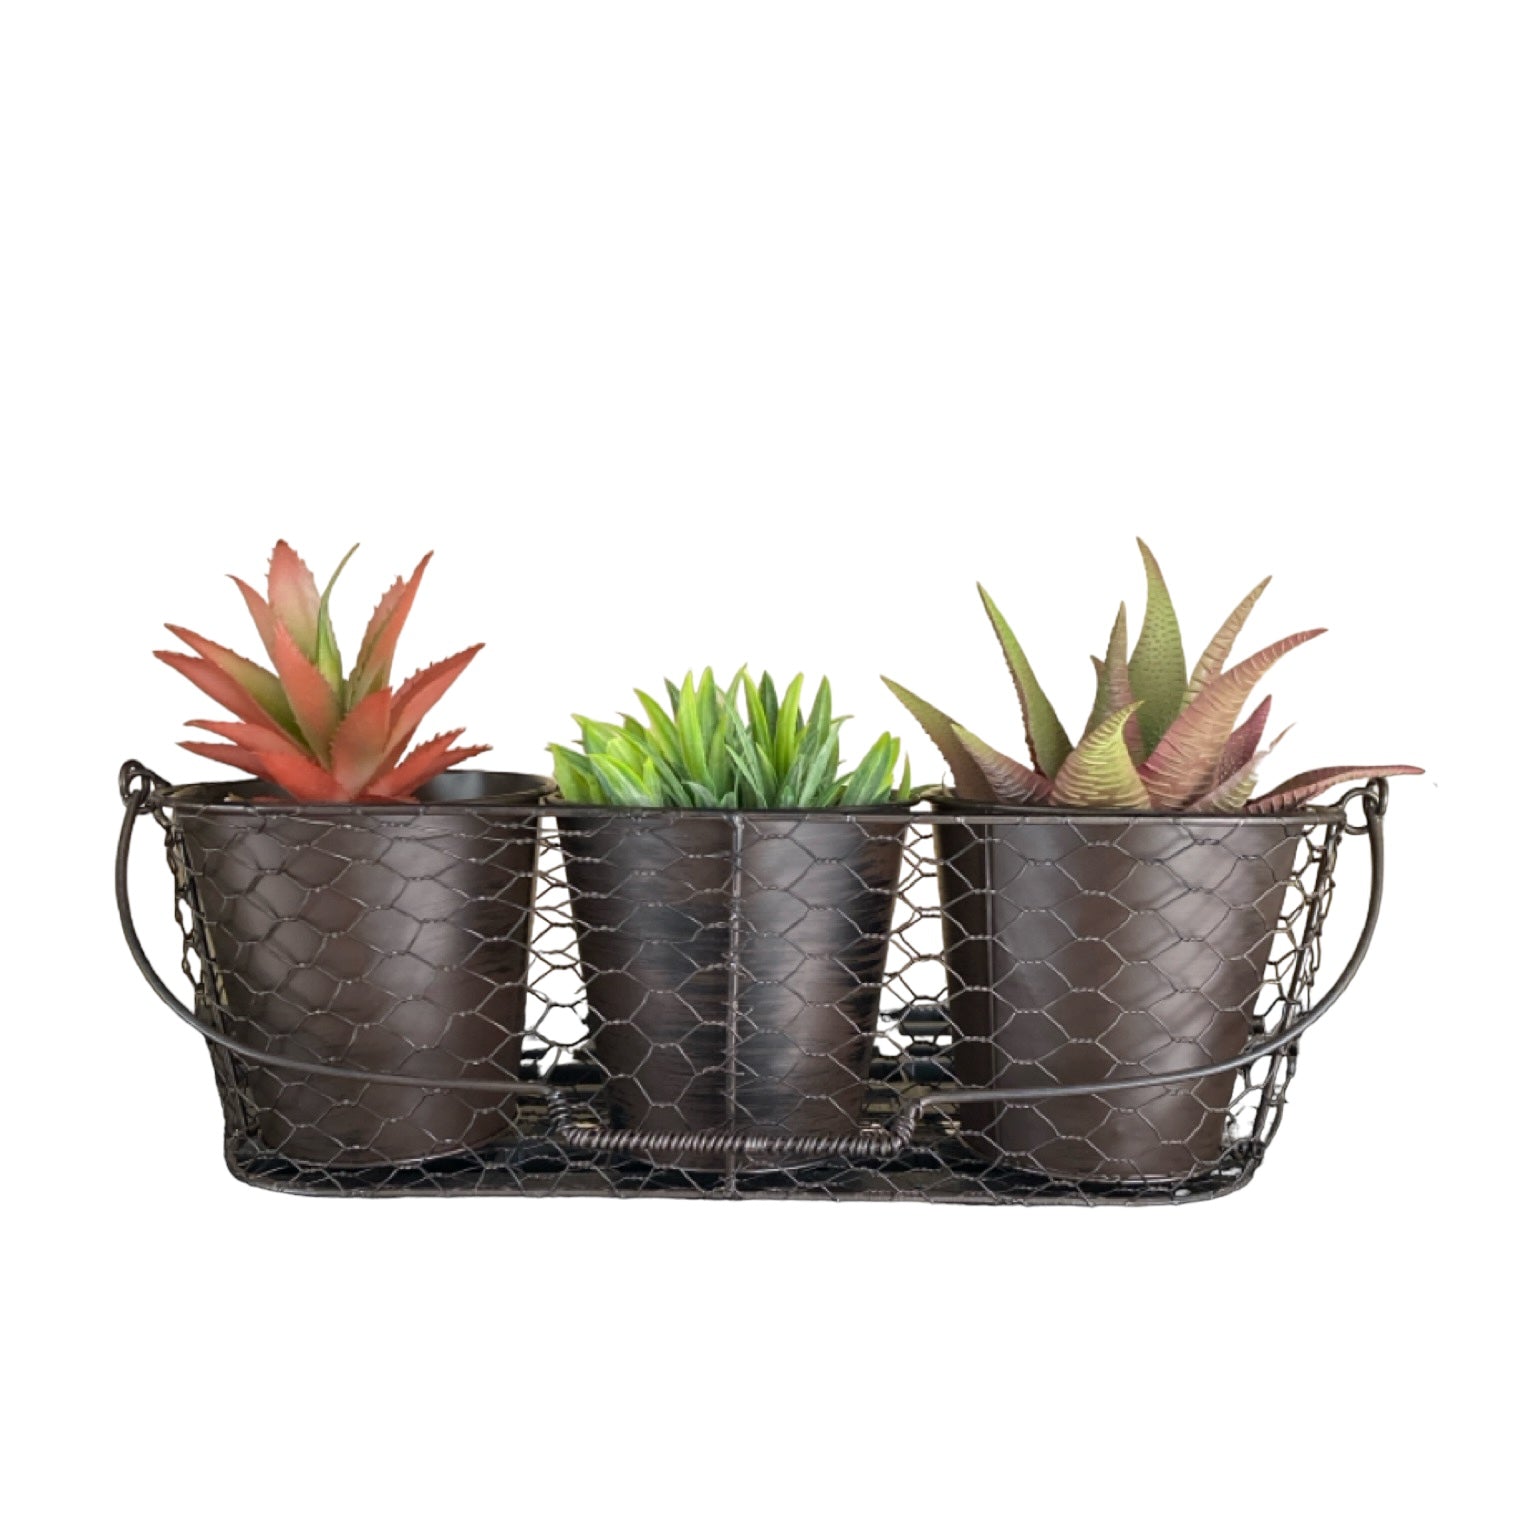 Three Pot Planter Herbs Rustic Dark - The Renmy Store Homewares & Gifts 